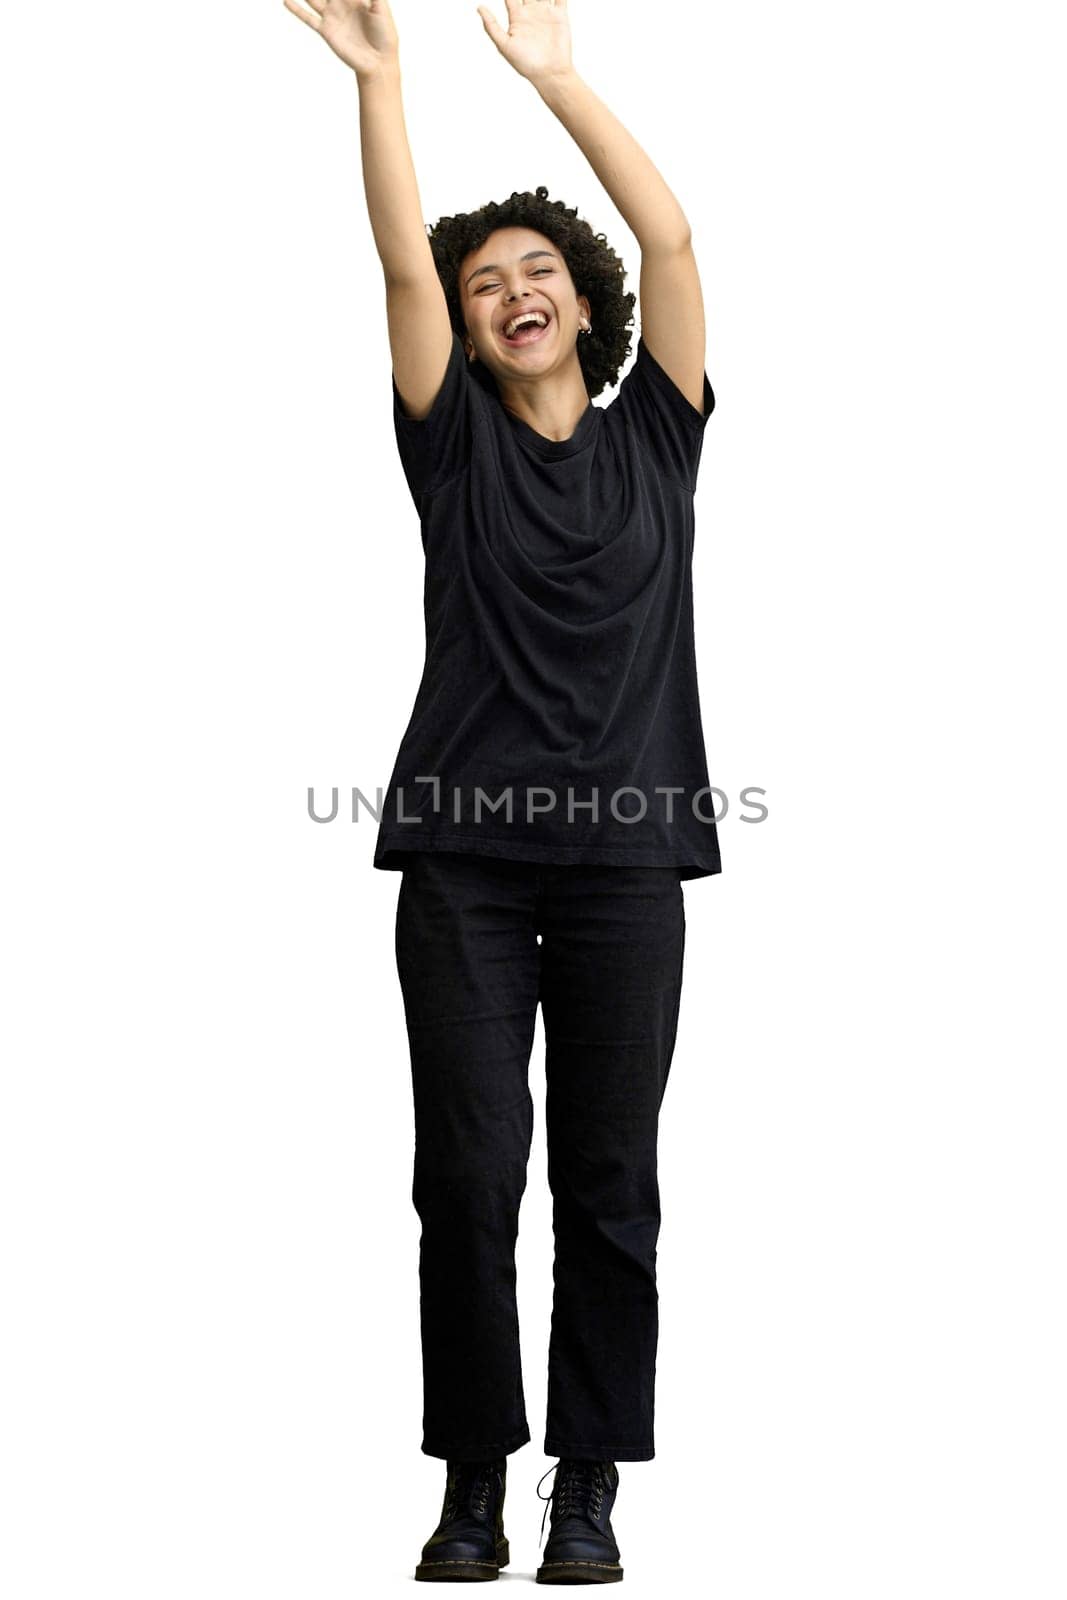 A woman, full-length, on a white background, waving her arms by Prosto